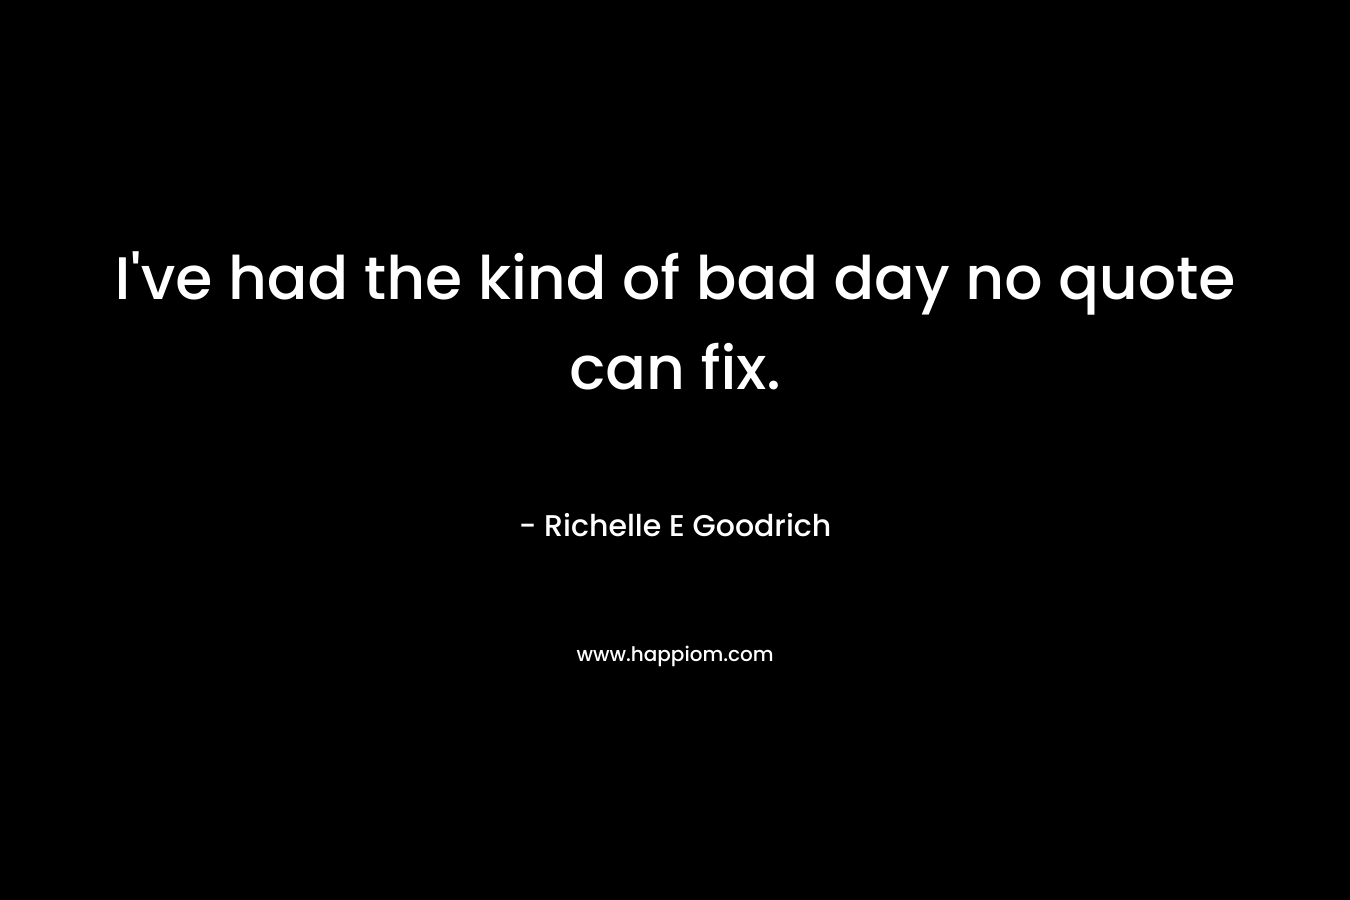 I've had the kind of bad day no quote can fix.